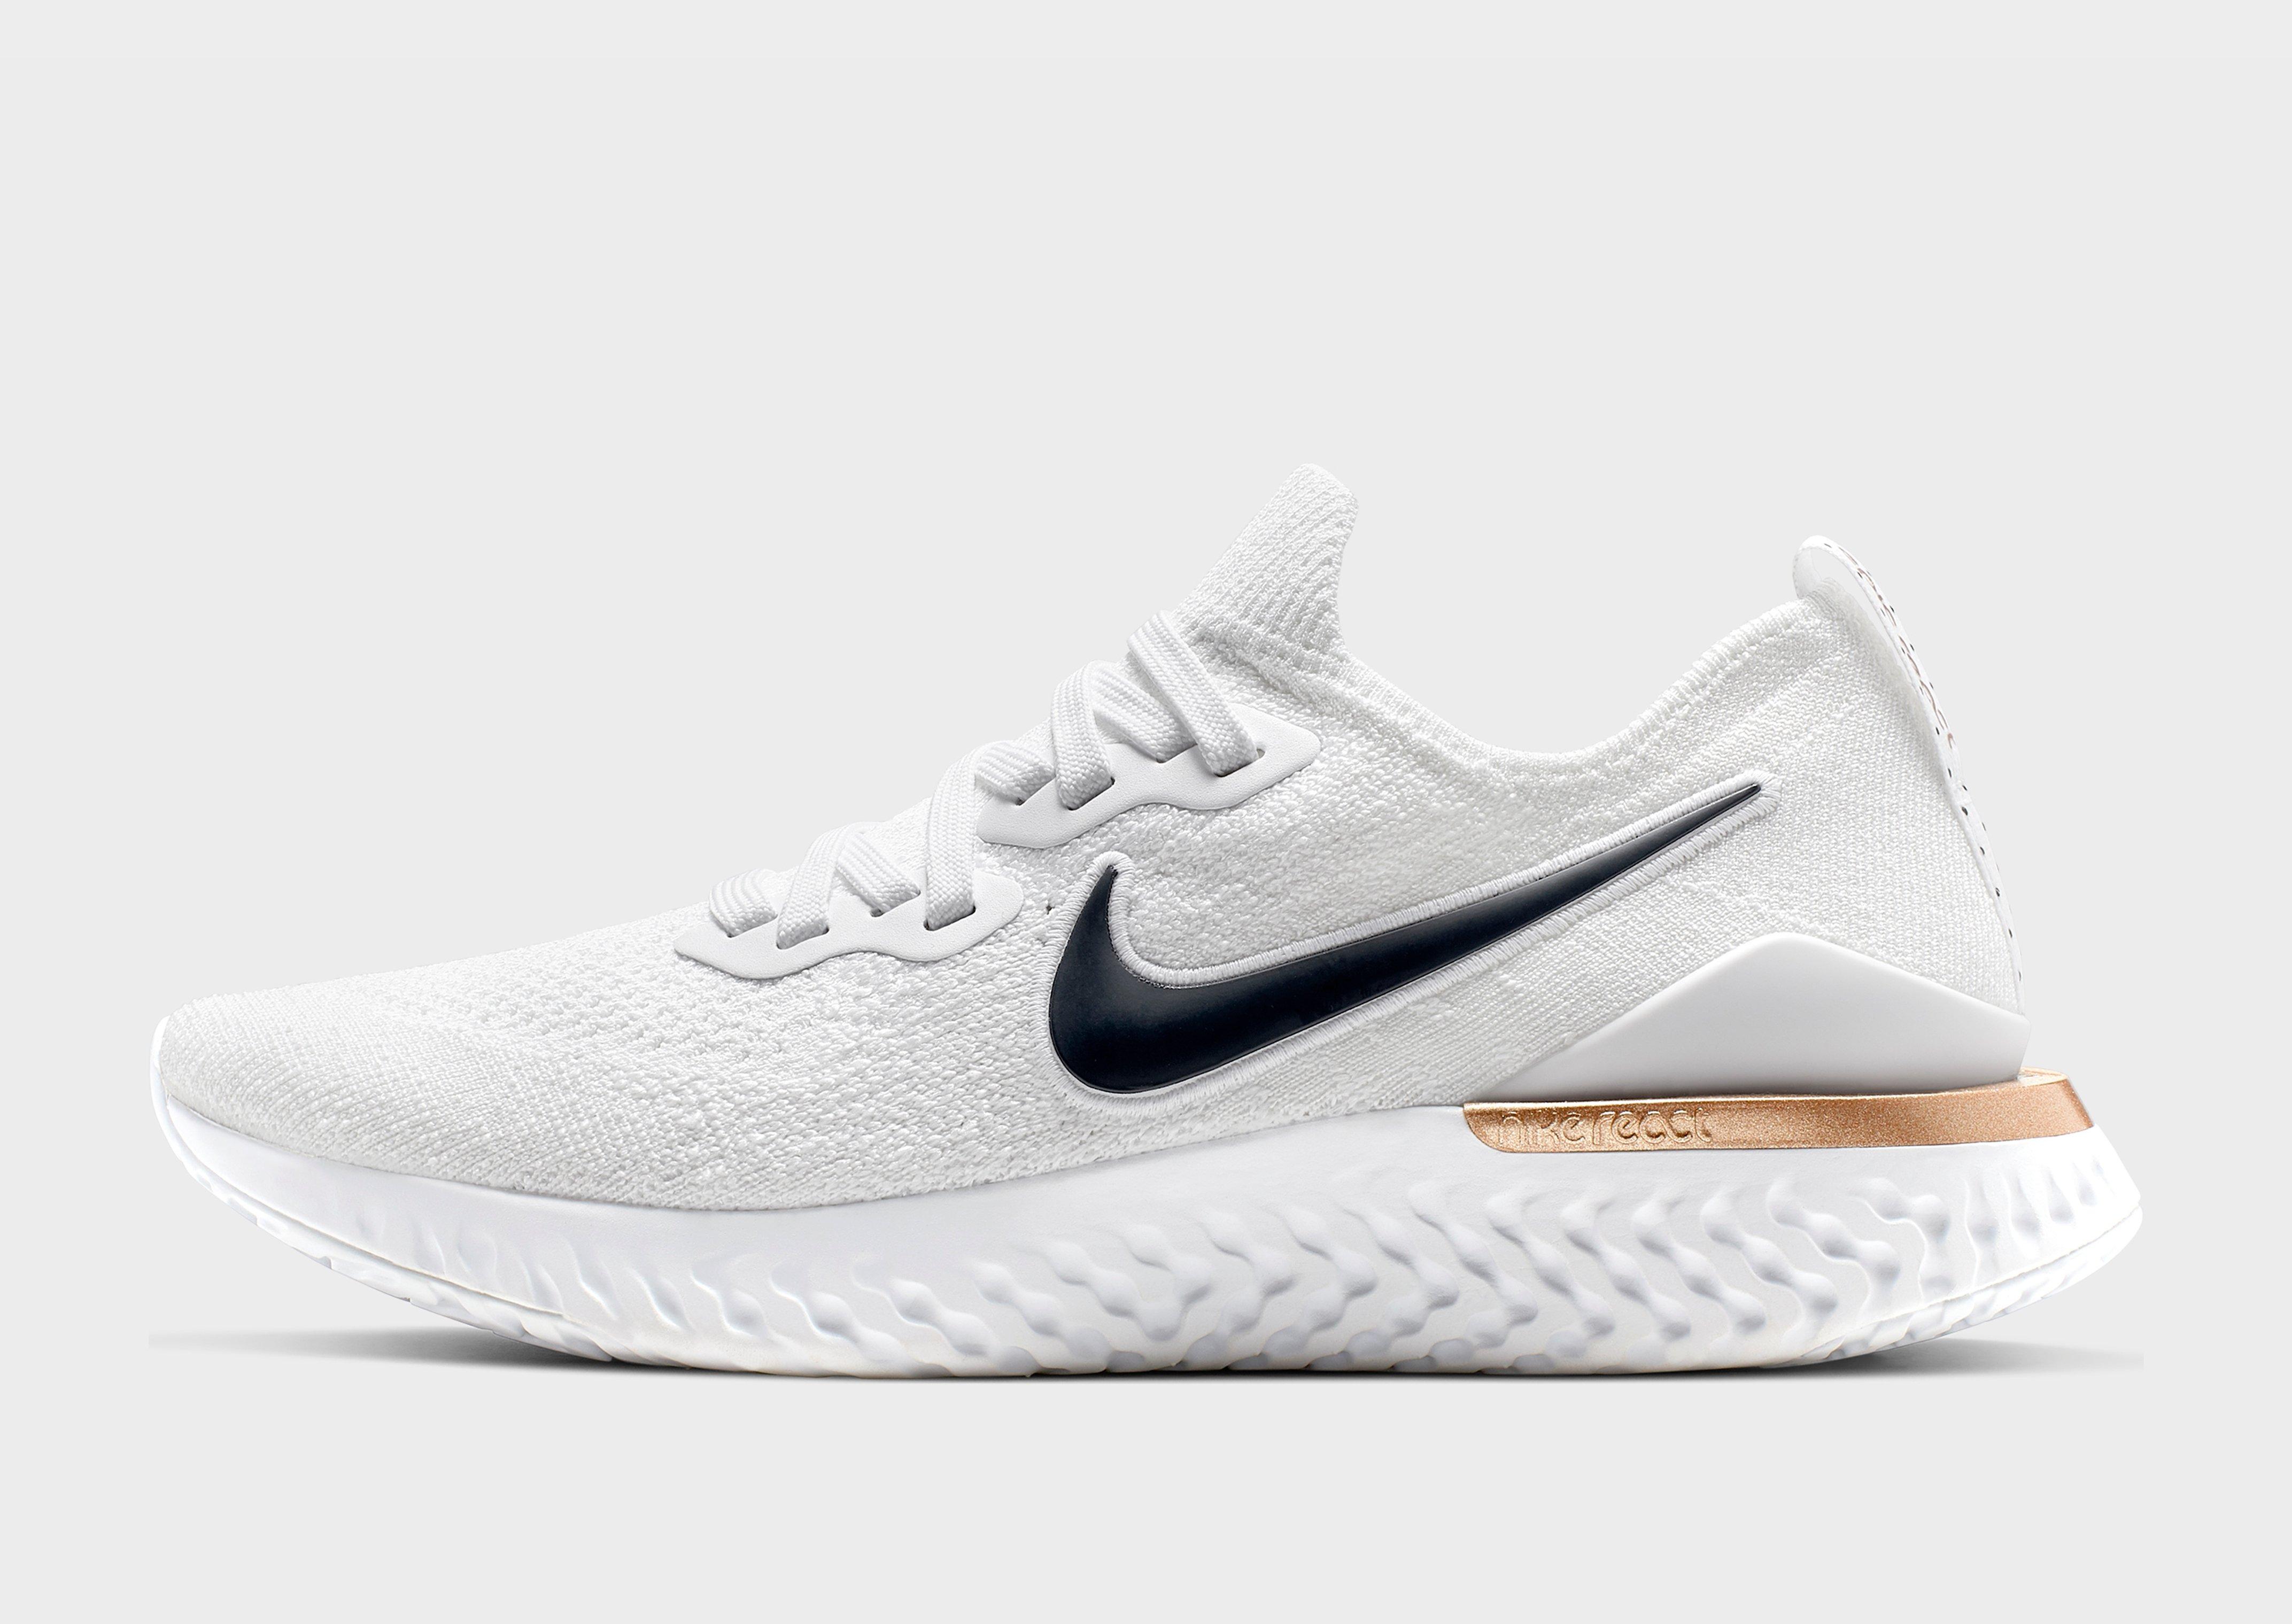 nike epic react flyknit 2 ladies running trainers